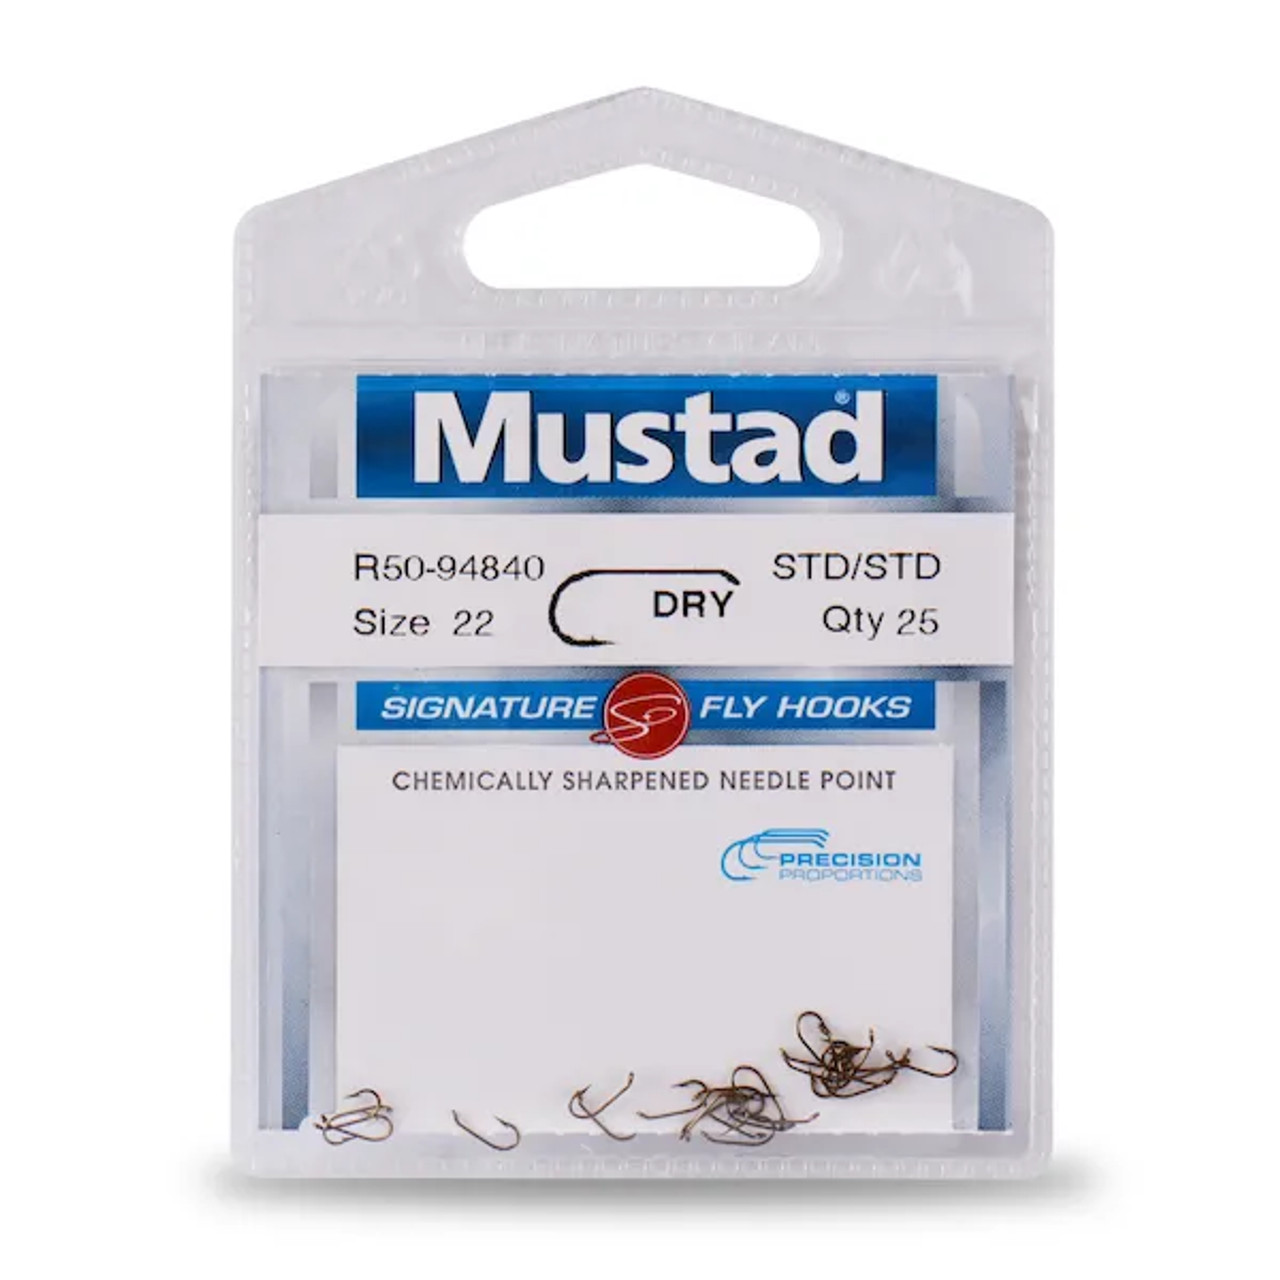 Mustad R50-94840 Dry Fly Hooks Size 10